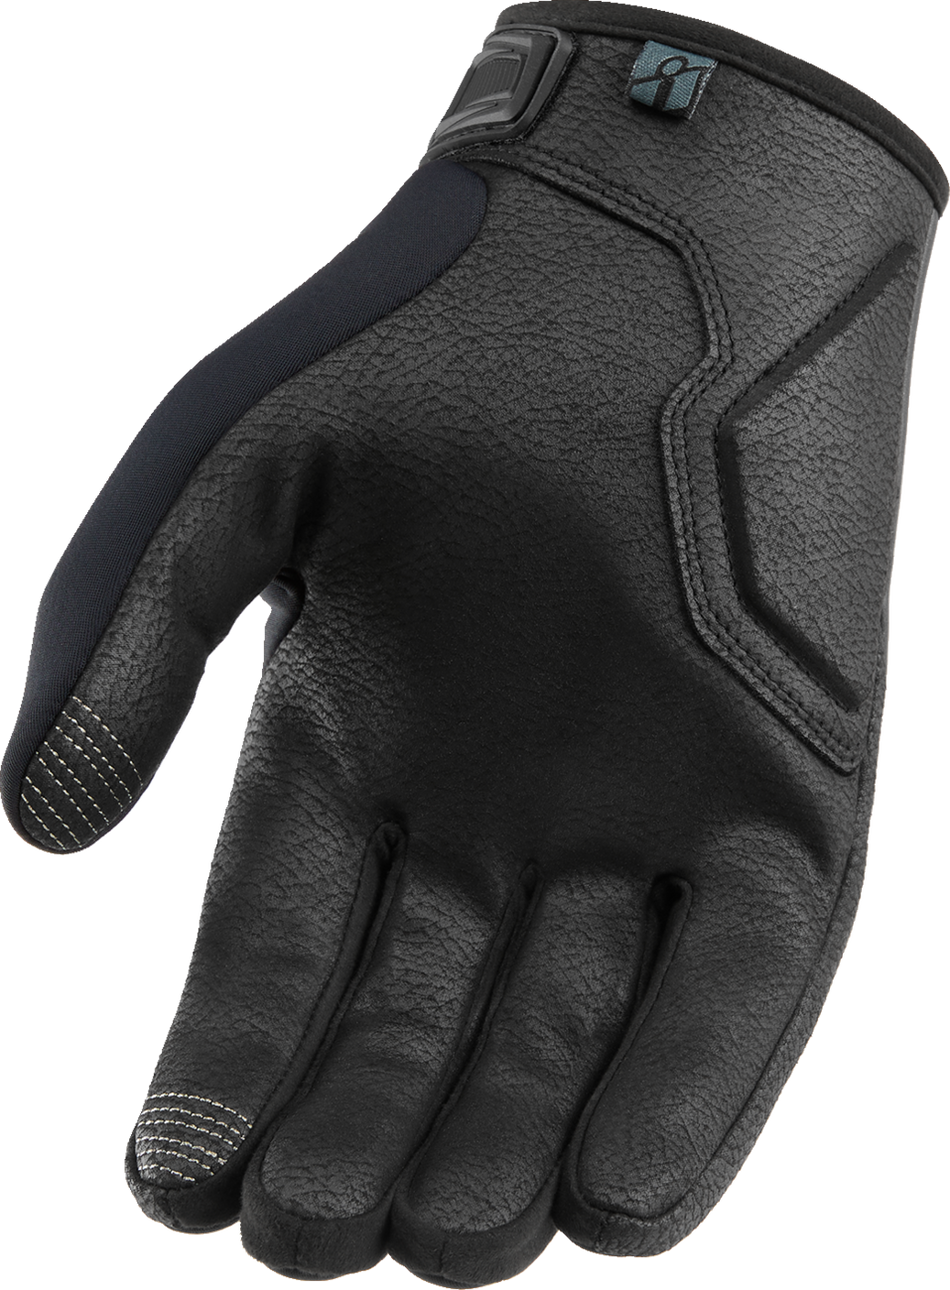 ICON Hooligan™ Insulated CE Gloves - Black - Small 3301-4487